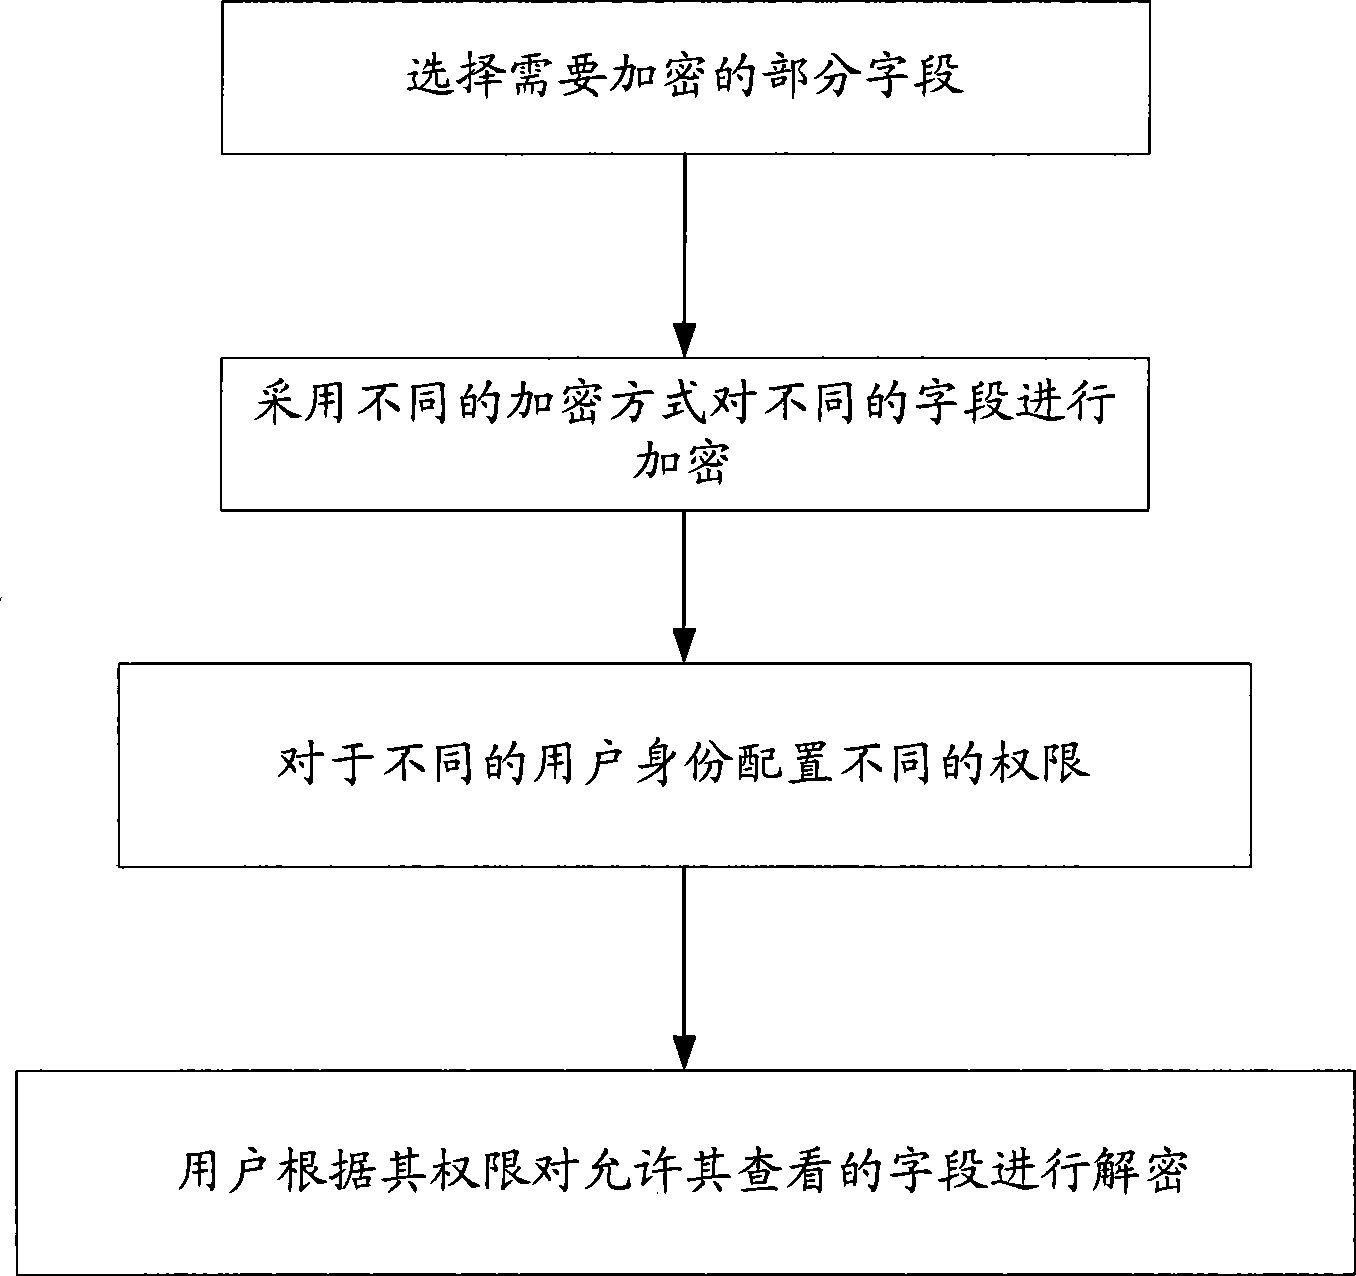 Encryption method and system based on data attributions